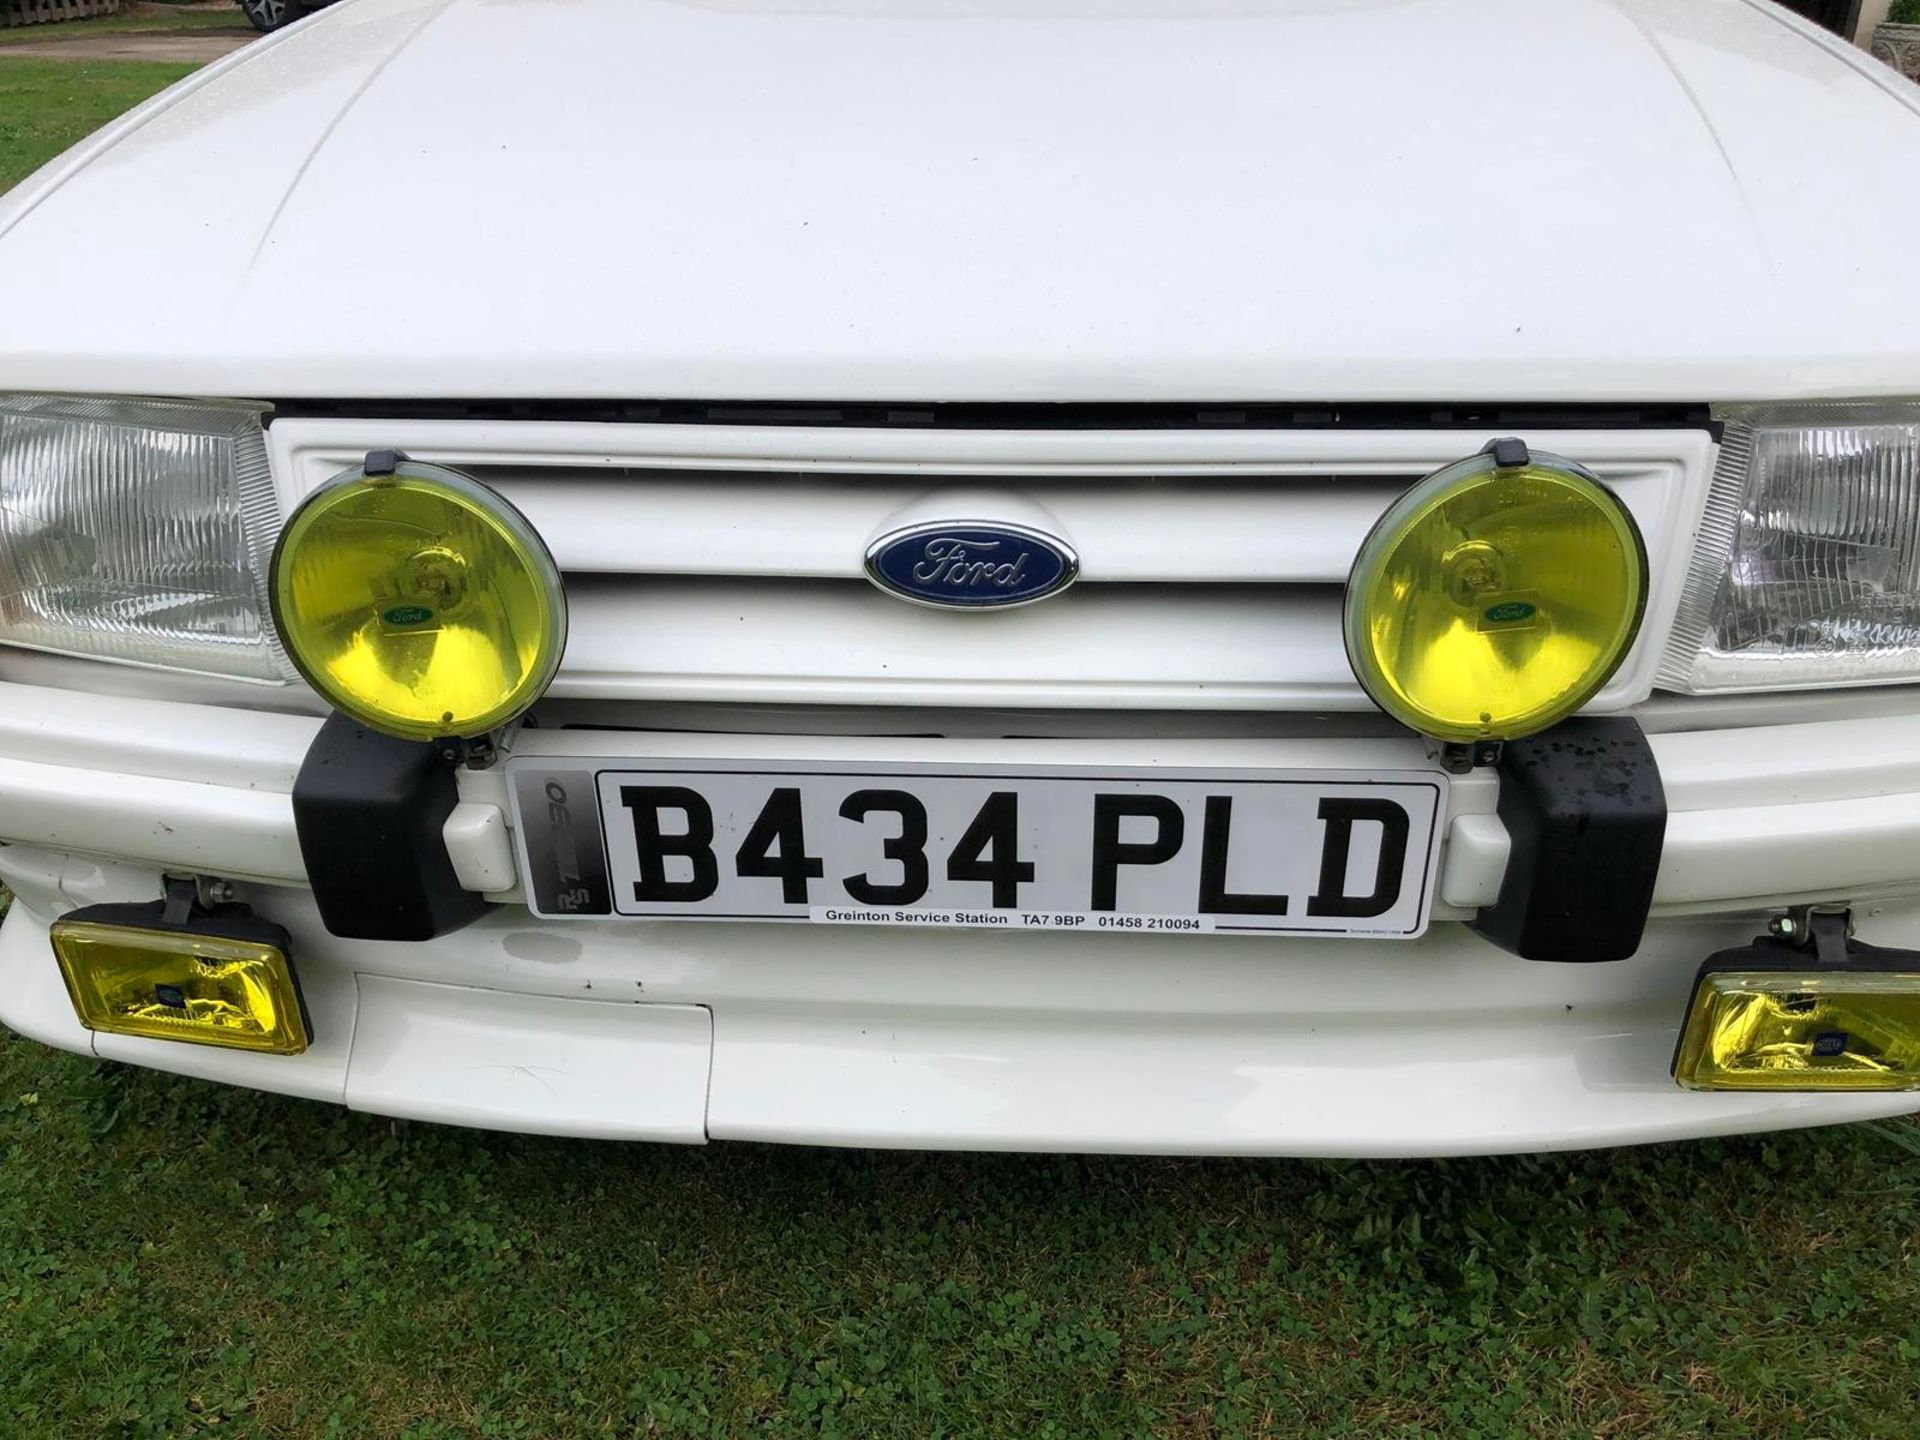 1985 Ford Escort RS Turbo Series 1 Registration number B434 PLD Diamond white with a grey Recaro - Image 59 of 79